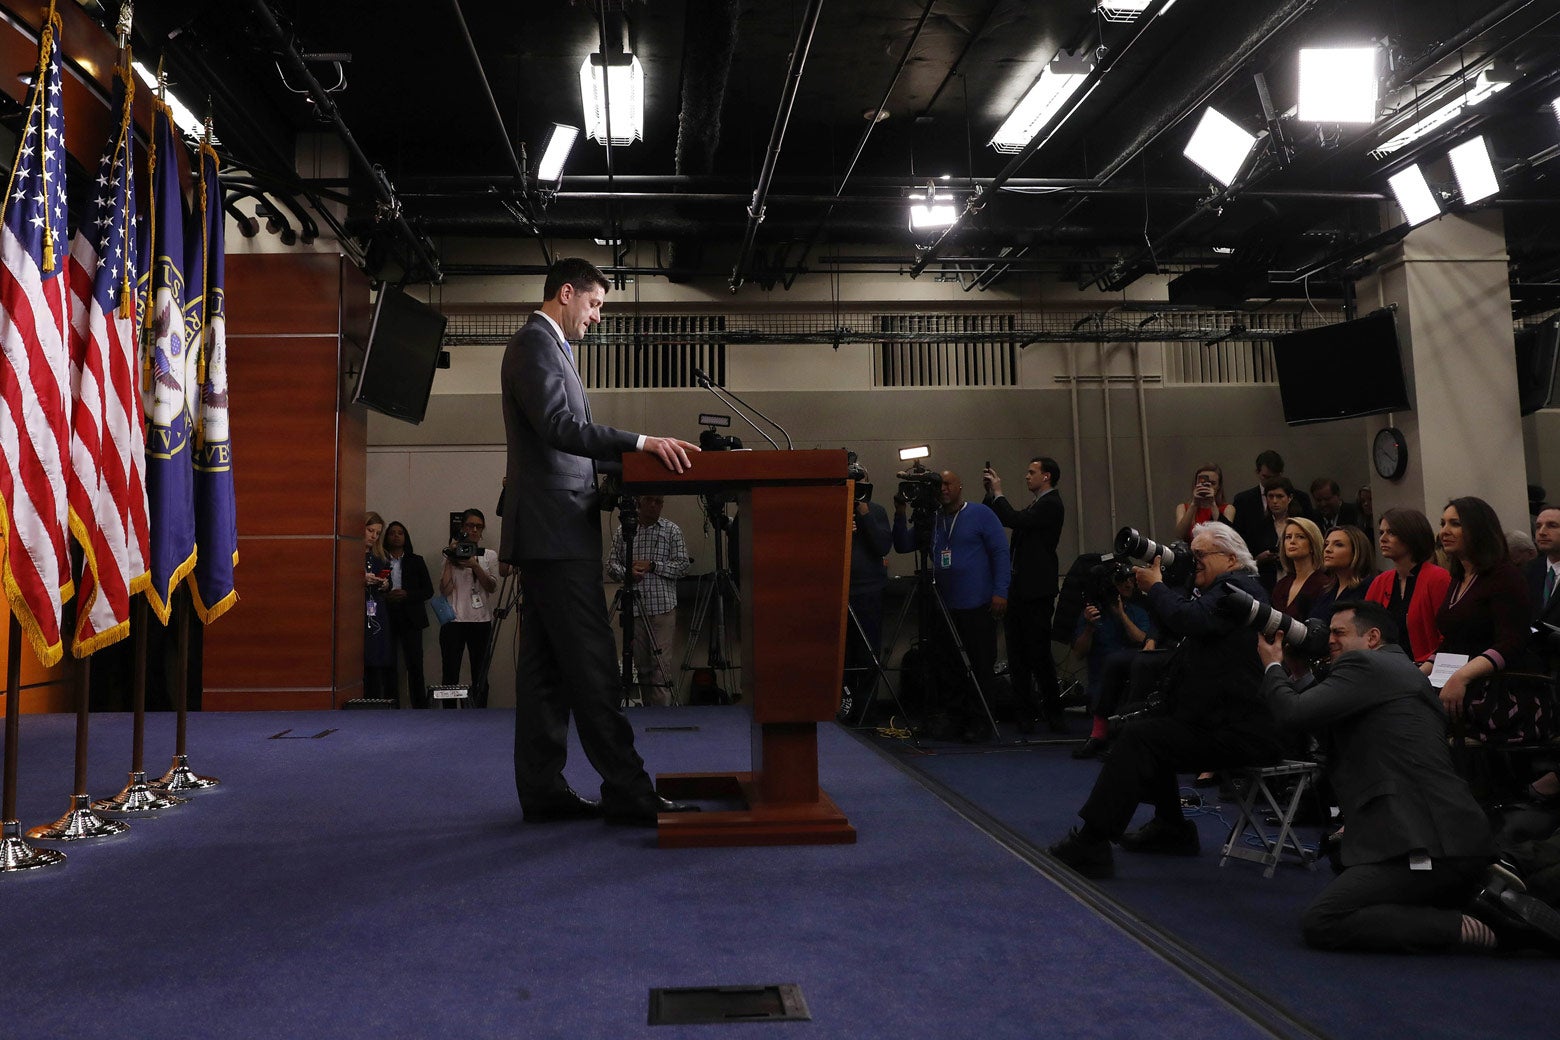 Paul Ryan stands behind a podium.